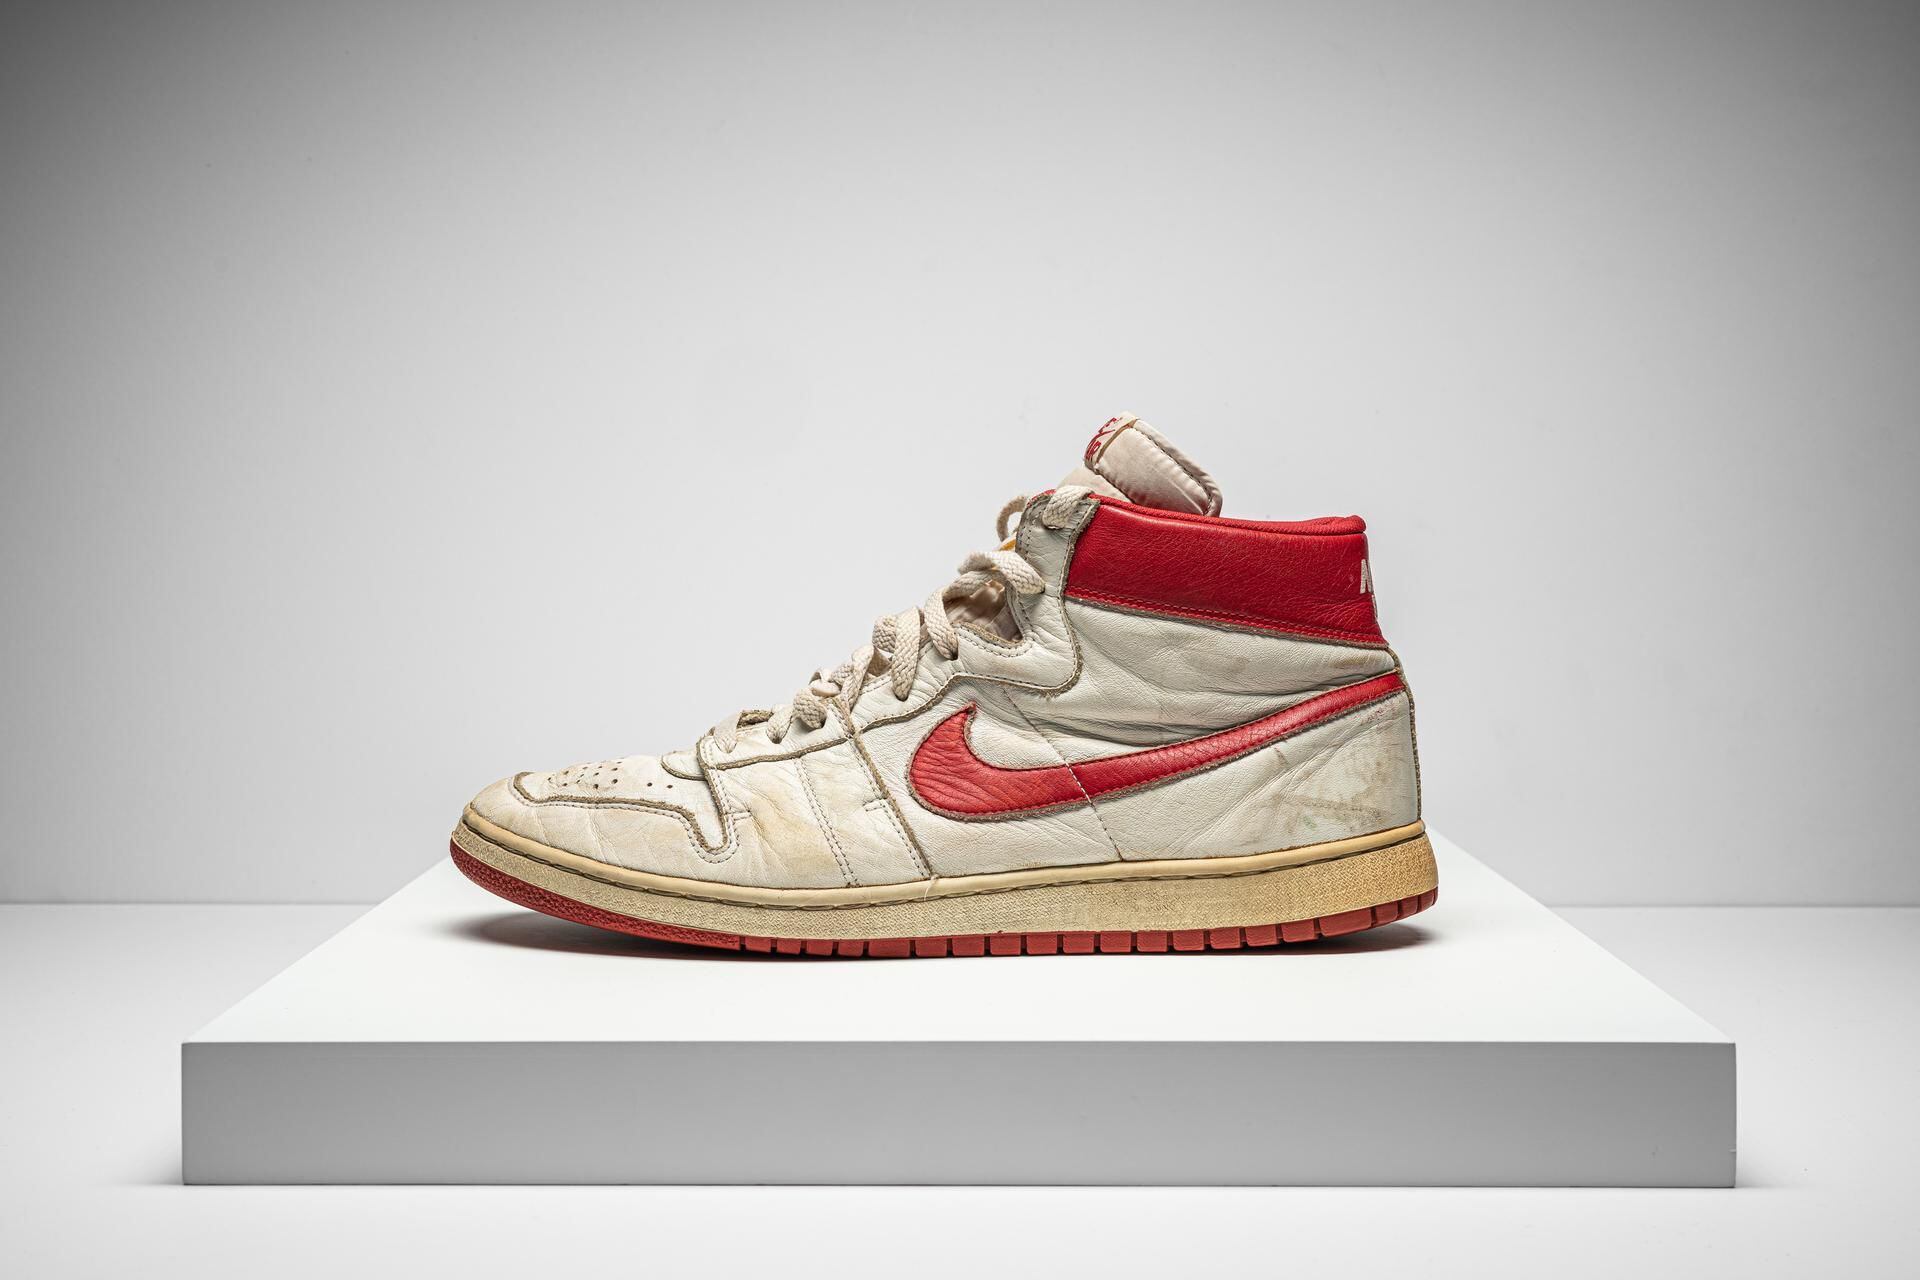 Sneakerheads Smashed Expectations at an Auction of Designs by